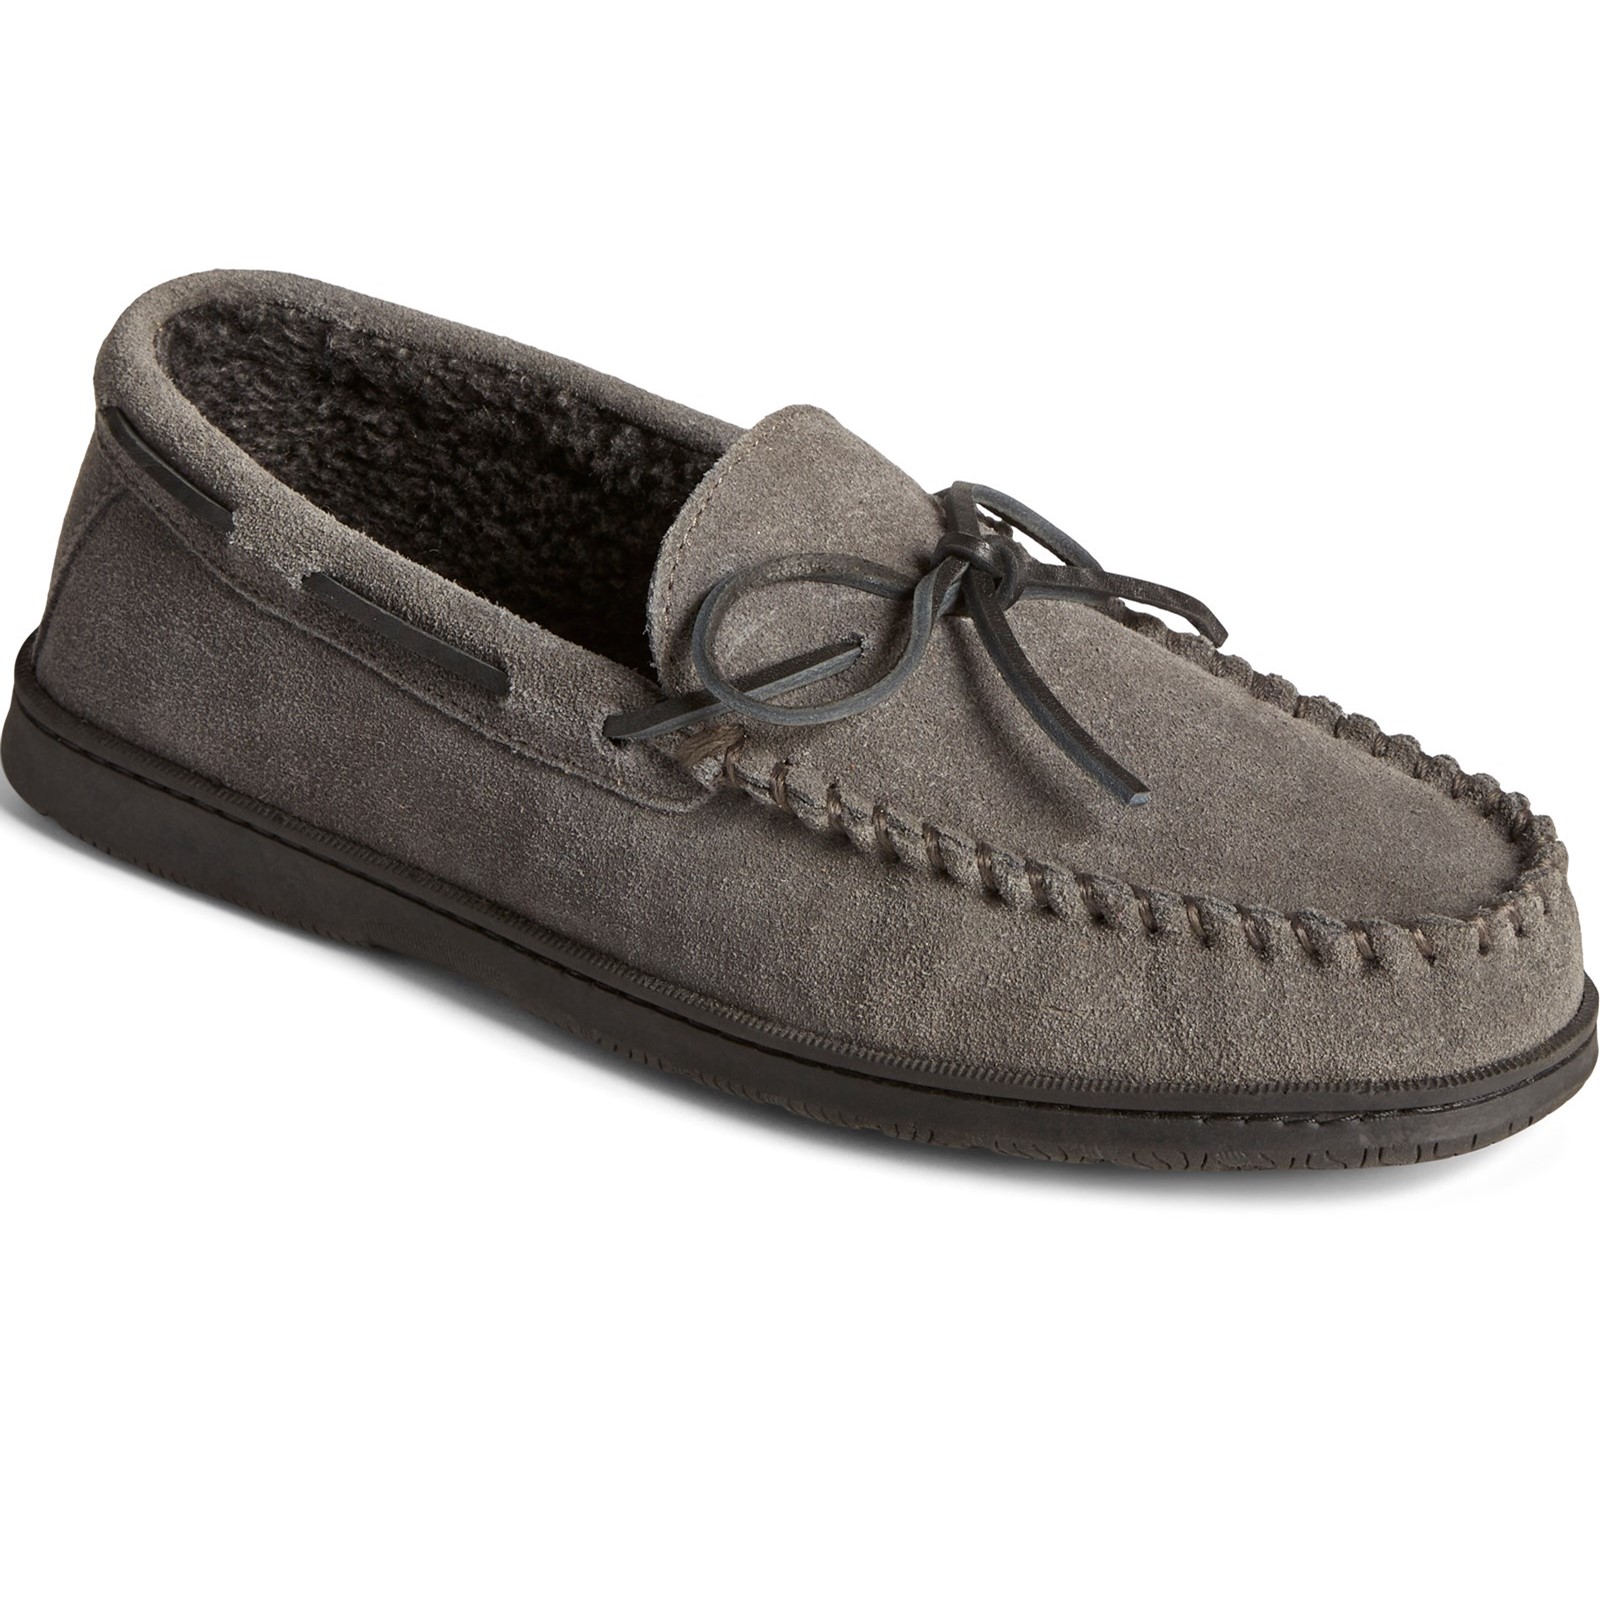 Doyle Moccasin Slippers